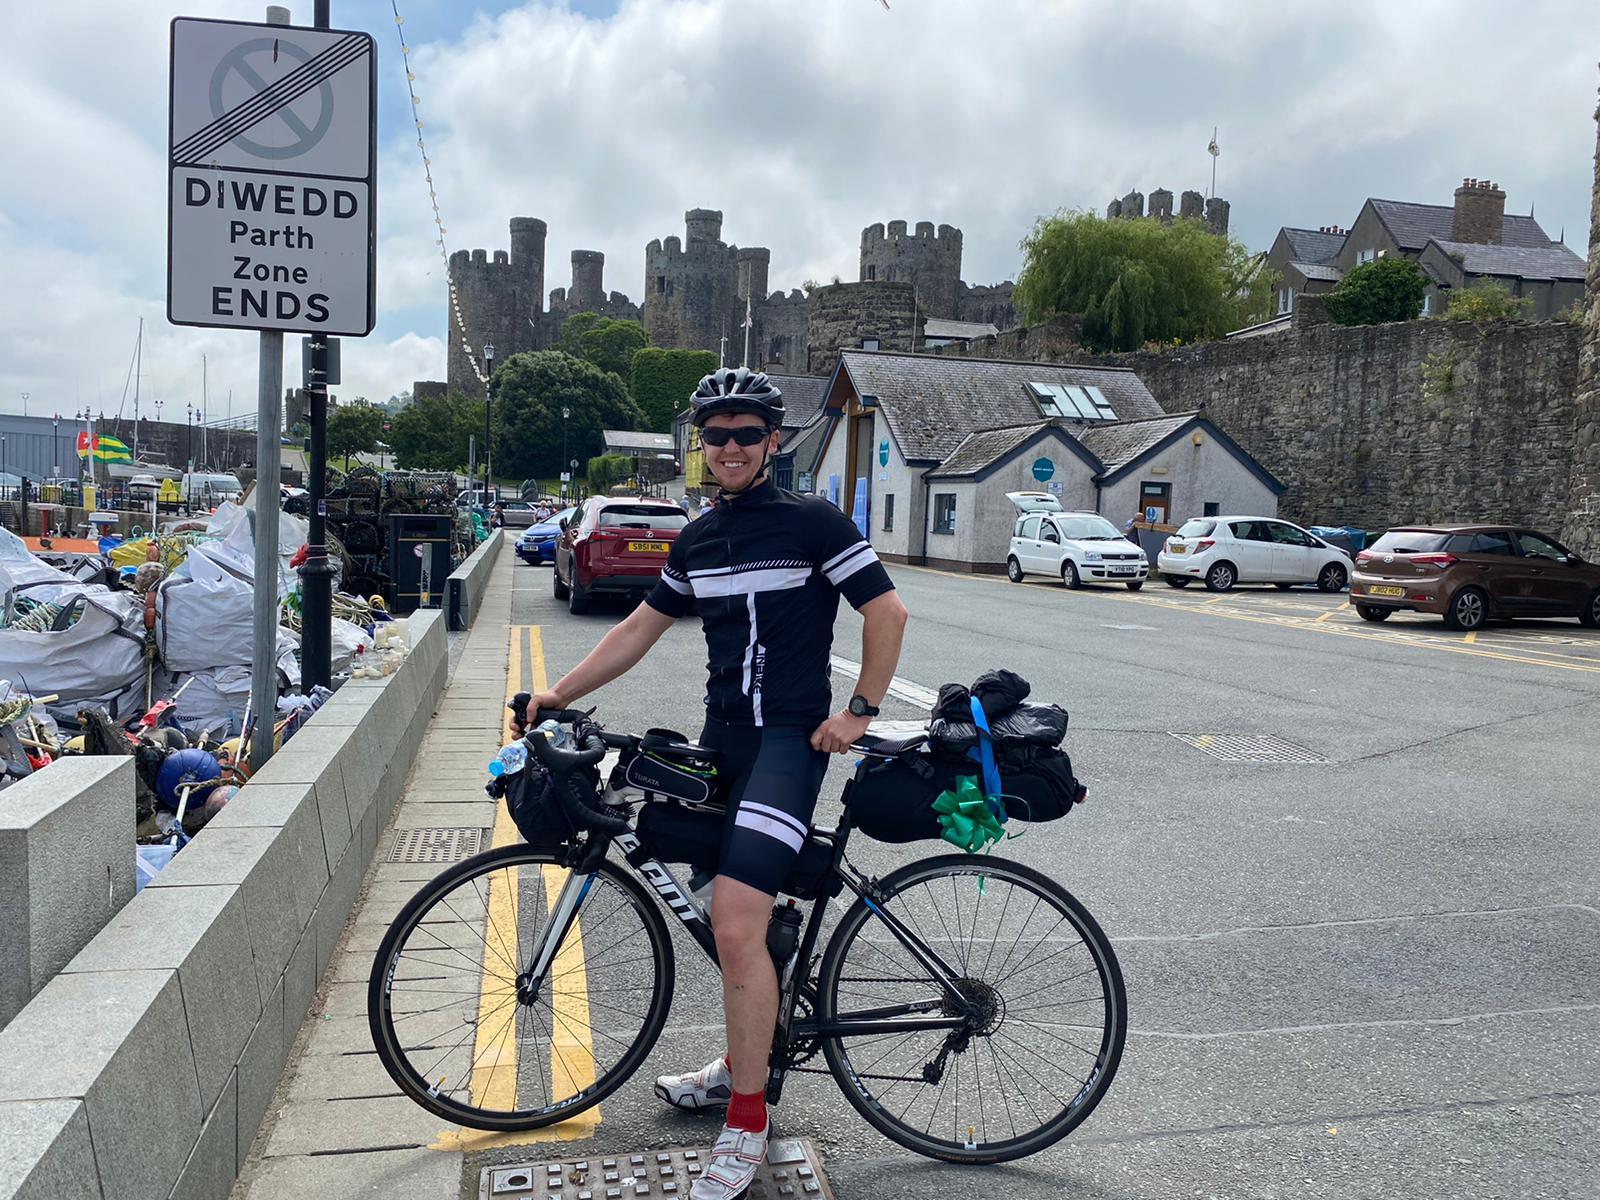 Daniel cycled a total of 680 miles during his challenge